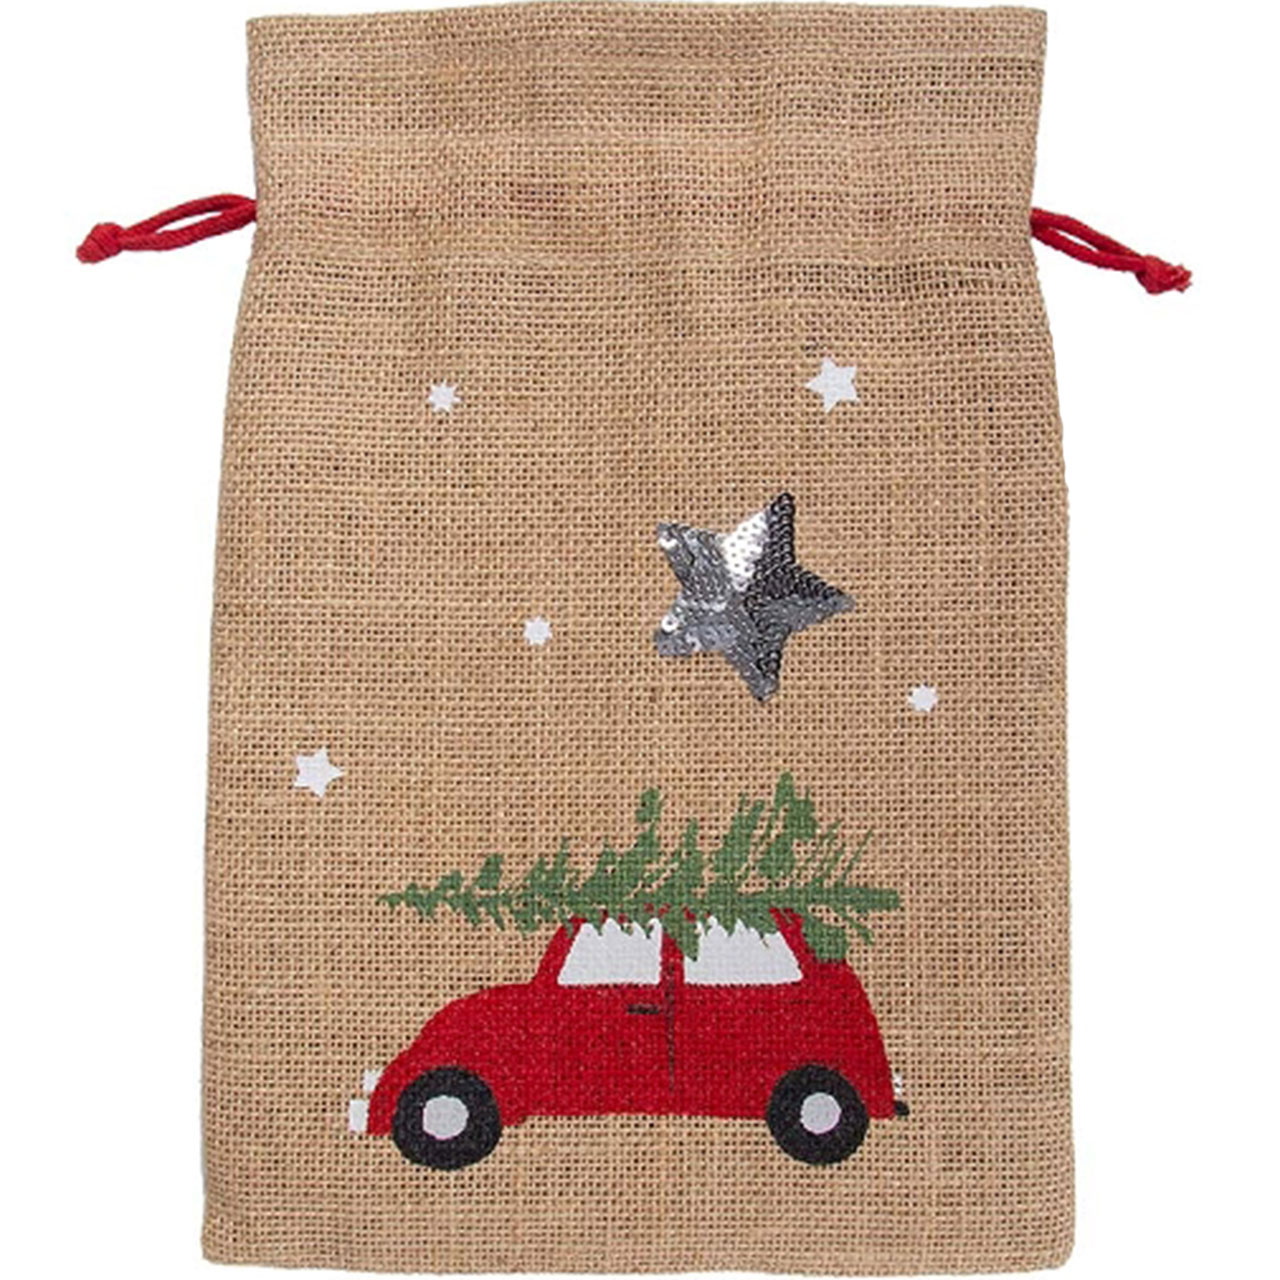 Jute Sack - Driving Home for Xmas (S)